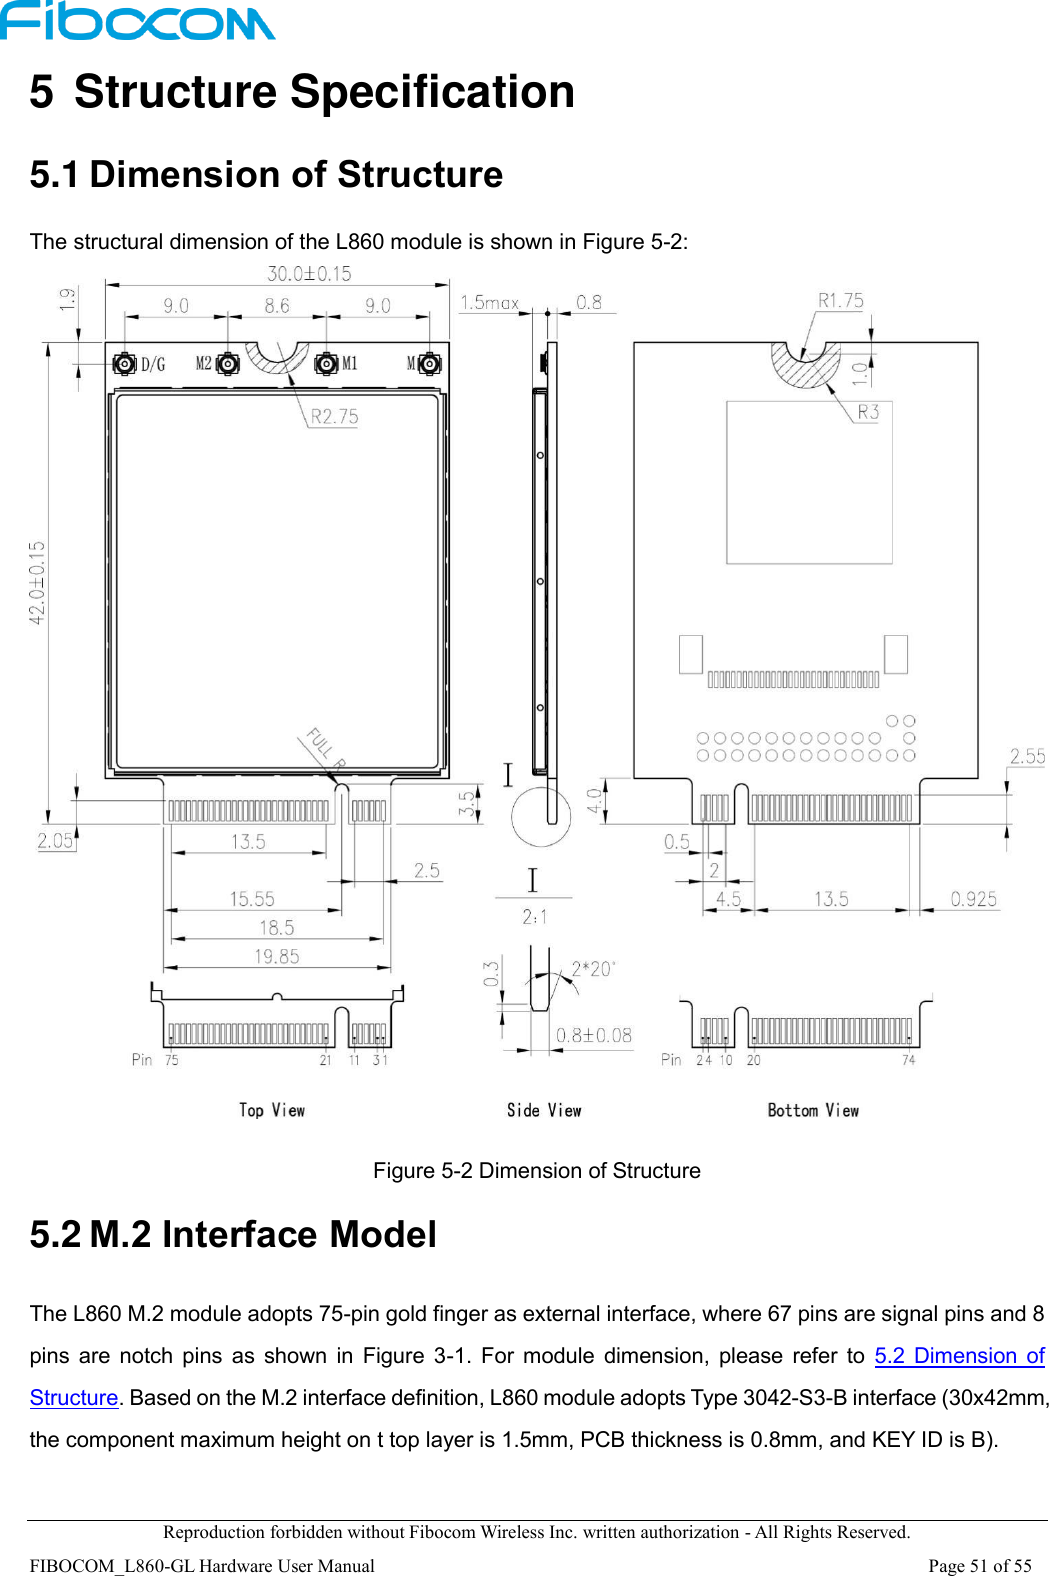  Reproduction forbidden without Fibocom Wireless Inc. written authorization - All Rights Reserved. FIBOCOM_L860-GL Hardware User Manual                                                                                                                      Page 51 of 55 5 Structure Specification 5.1 Dimension of Structure The structural dimension of the L860 module is shown in Figure 5-2:   Figure 5-2 Dimension of Structure 5.2 M.2 Interface Model The L860 M.2 module adopts 75-pin gold finger as external interface, where 67 pins are signal pins and 8 pins  are  notch  pins  as  shown  in  Figure  3-1.  For  module  dimension,  please  refer  to  5.2  Dimension of Structure. Based on the M.2 interface definition, L860 module adopts Type 3042-S3-B interface (30x42mm, the component maximum height on t top layer is 1.5mm, PCB thickness is 0.8mm, and KEY ID is B).  